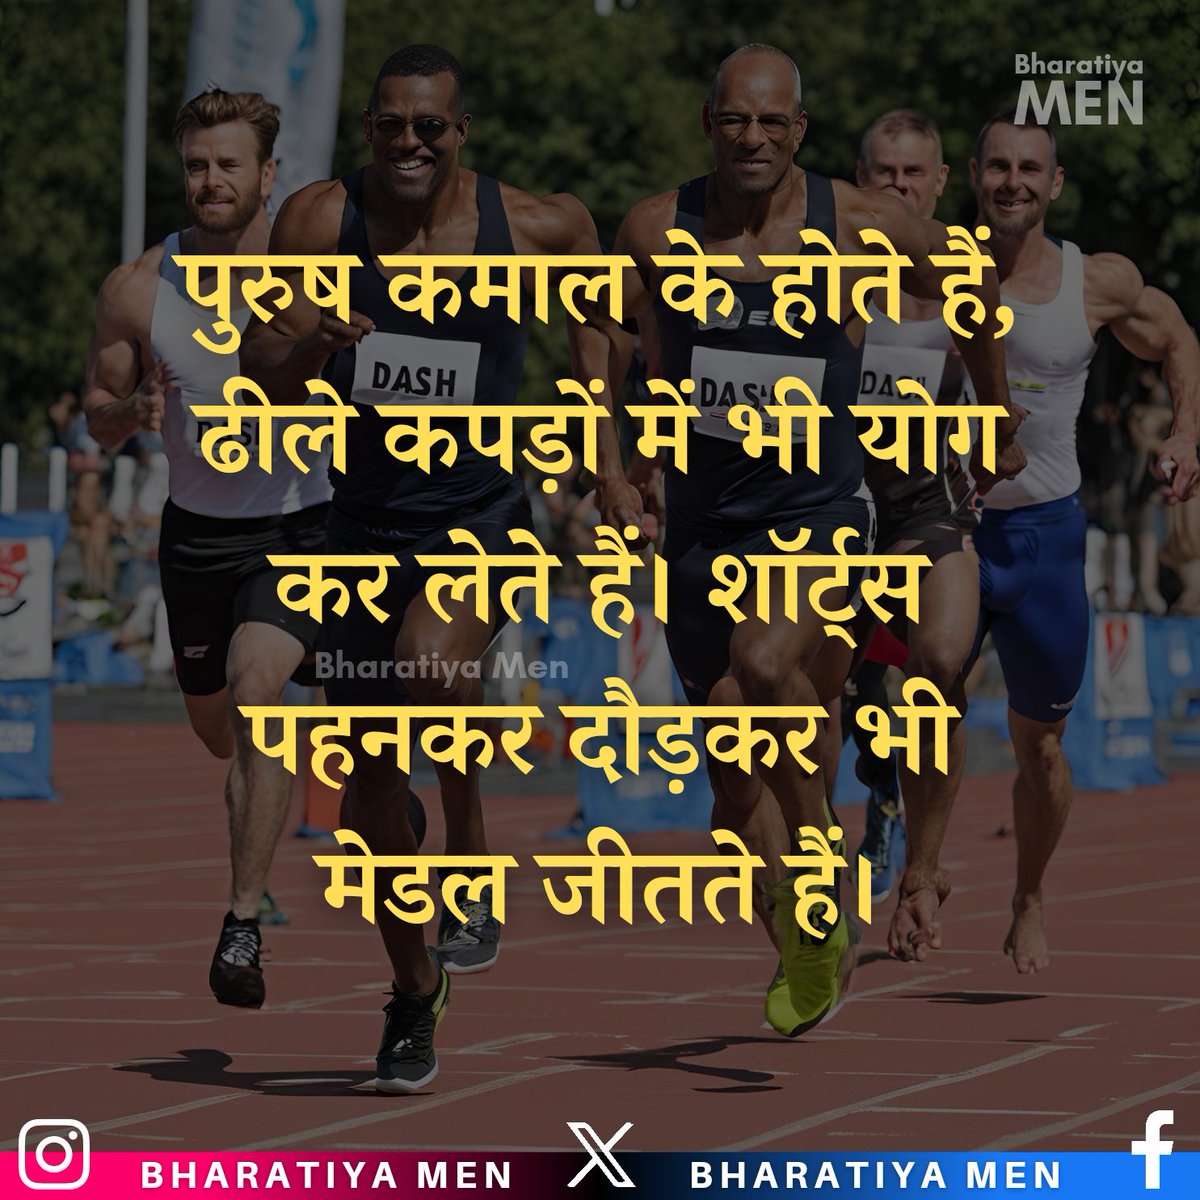 Men are amazing, they can do yoga even in loose clothes. They can also win medals by running in shorts.